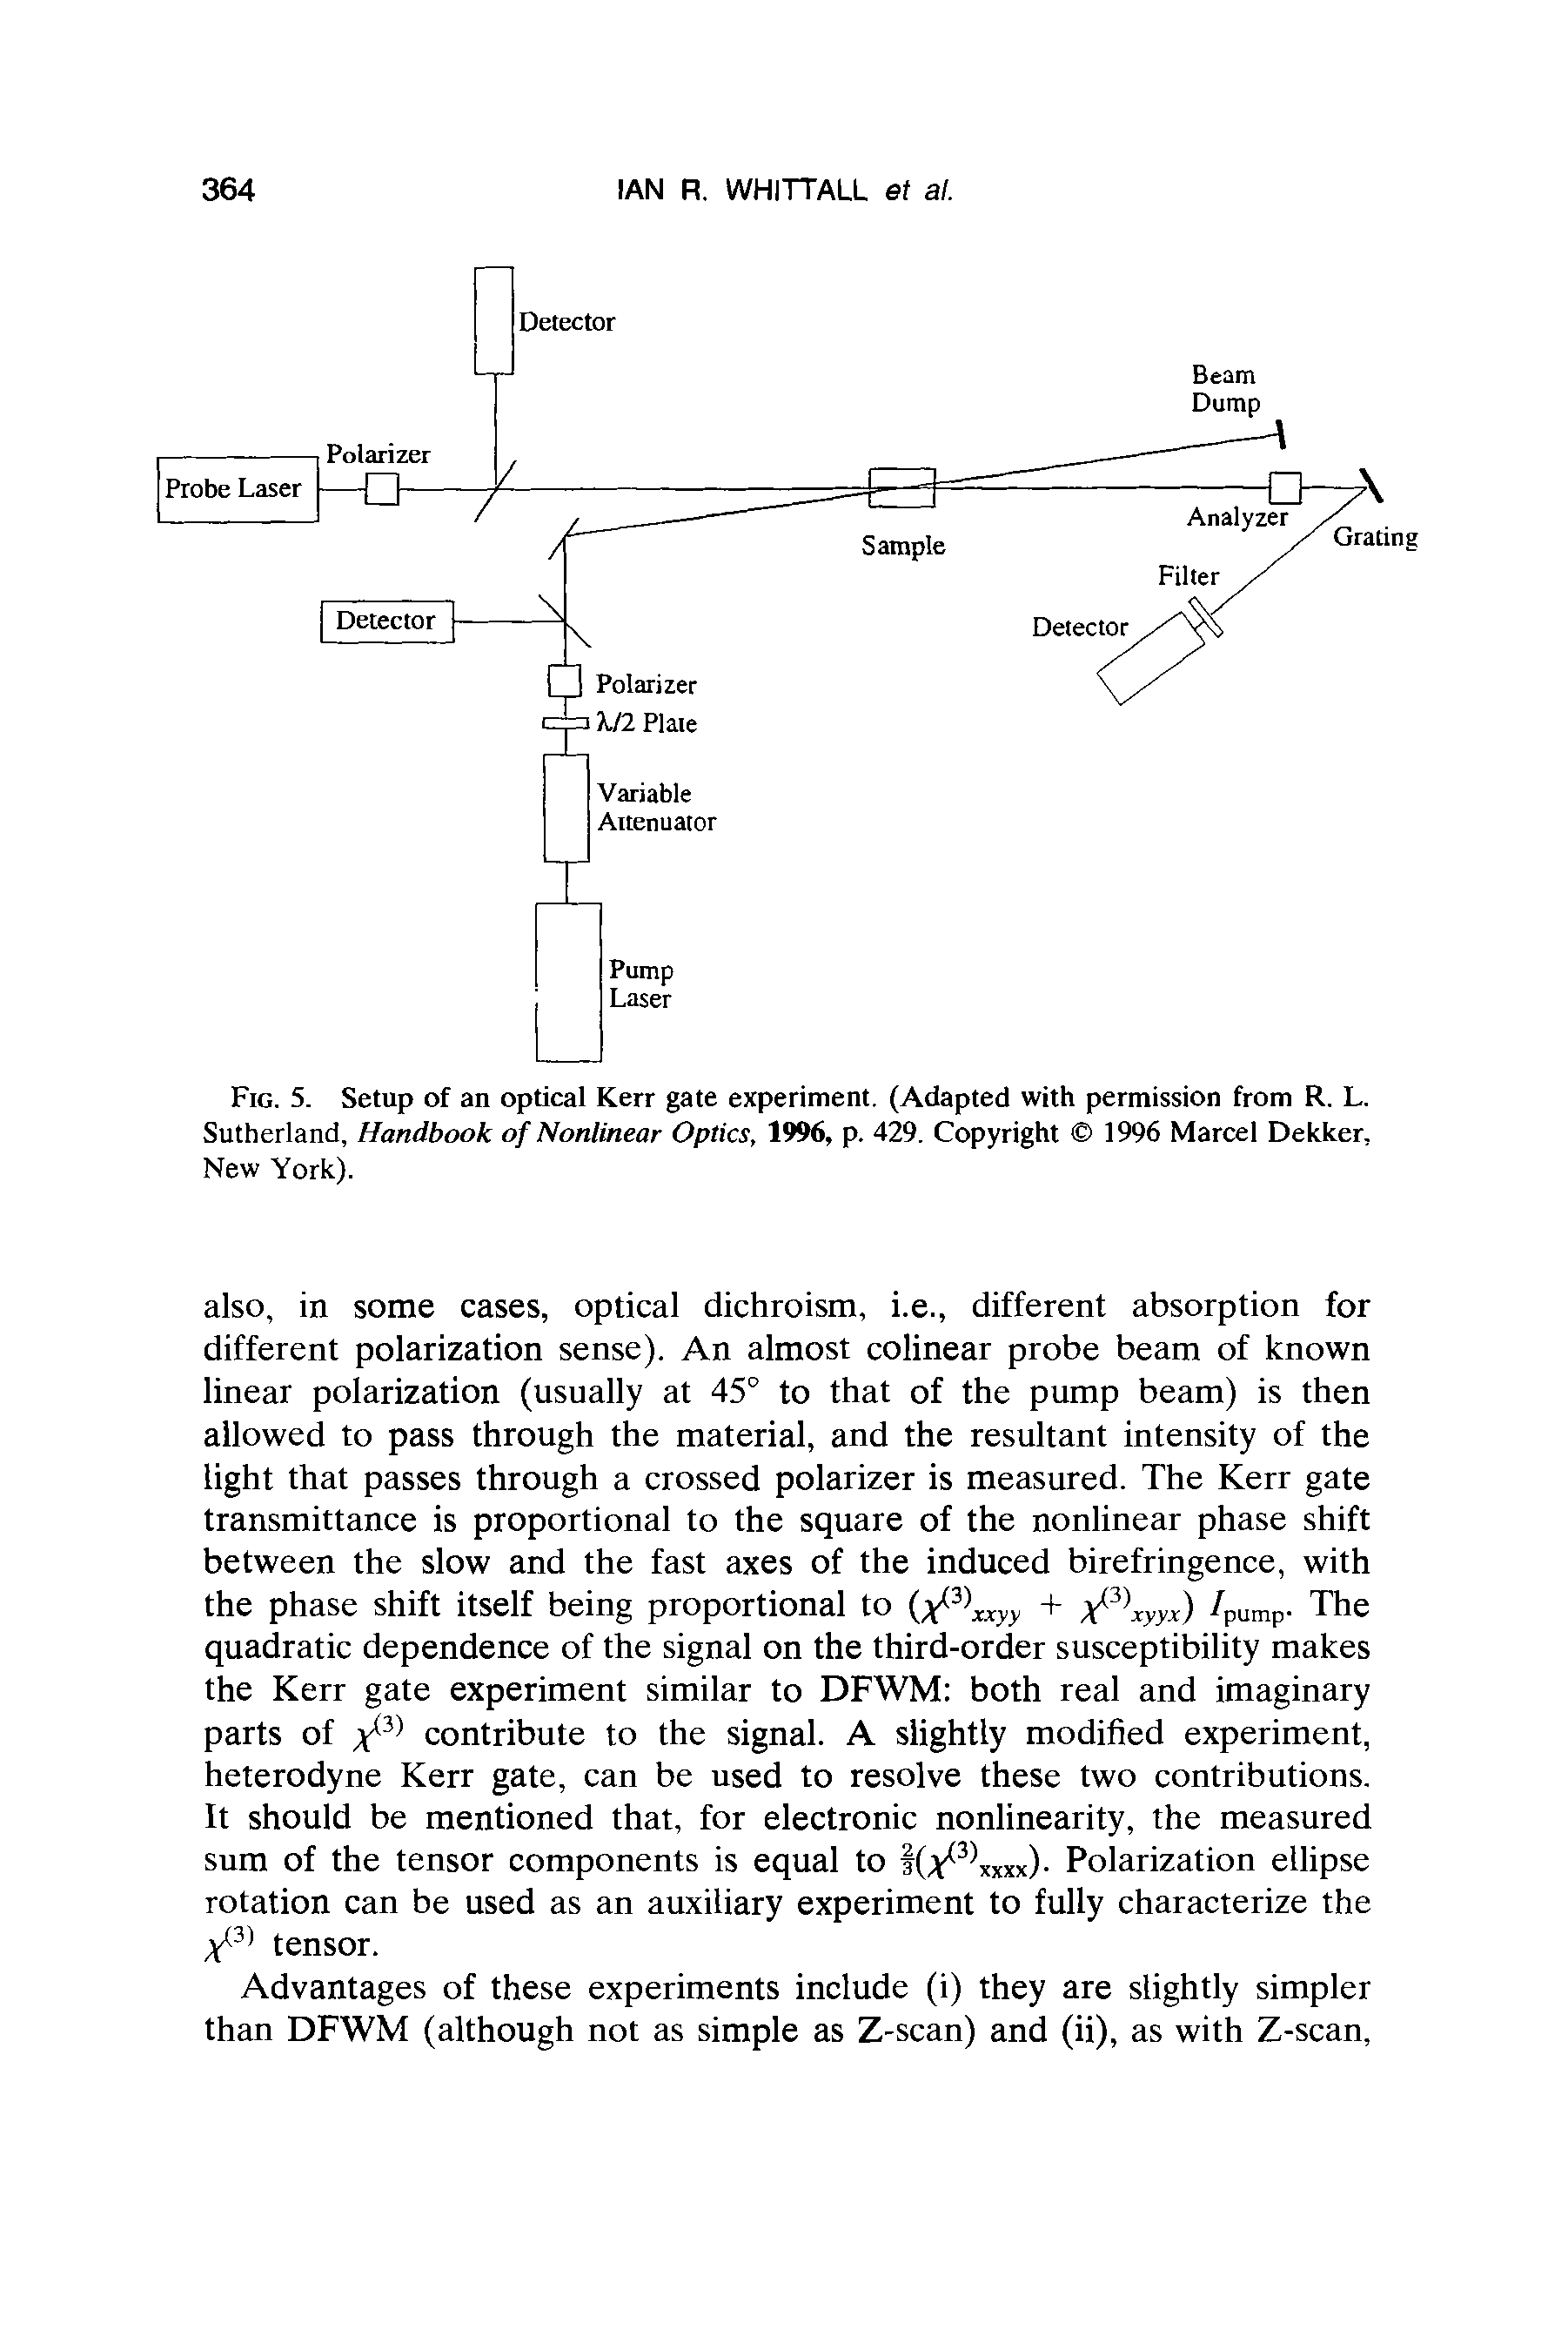 Fig. 5. Setup of an optical Kerr gate experiment. (Adapted with permission from R. L. Sutherland, Handbook of Nonlinear Optics, 1996, p. 429. Copyright 1996 Marcel Dekker, New York).